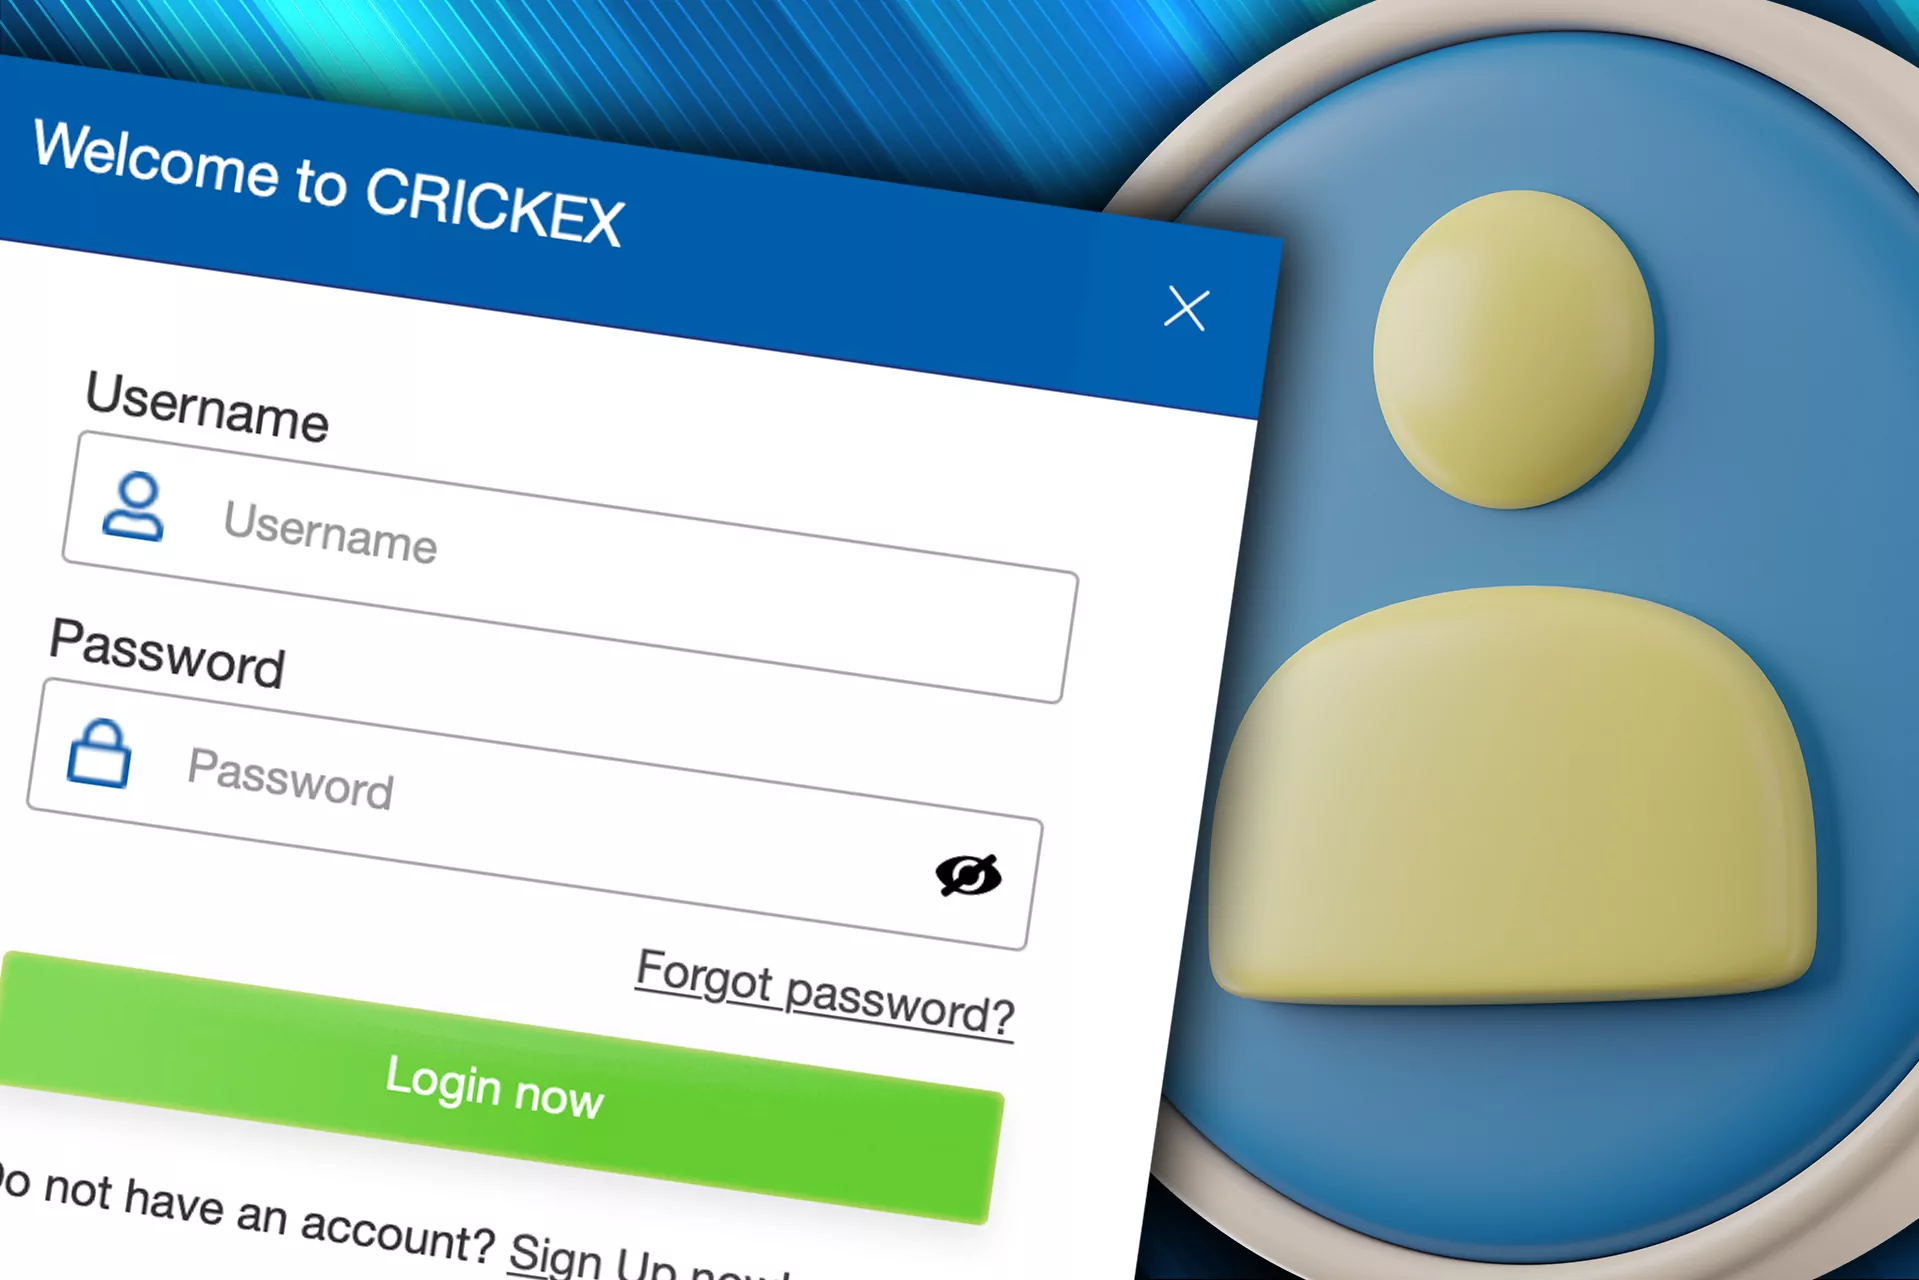 Use youe username and password and enter your Crickex account.